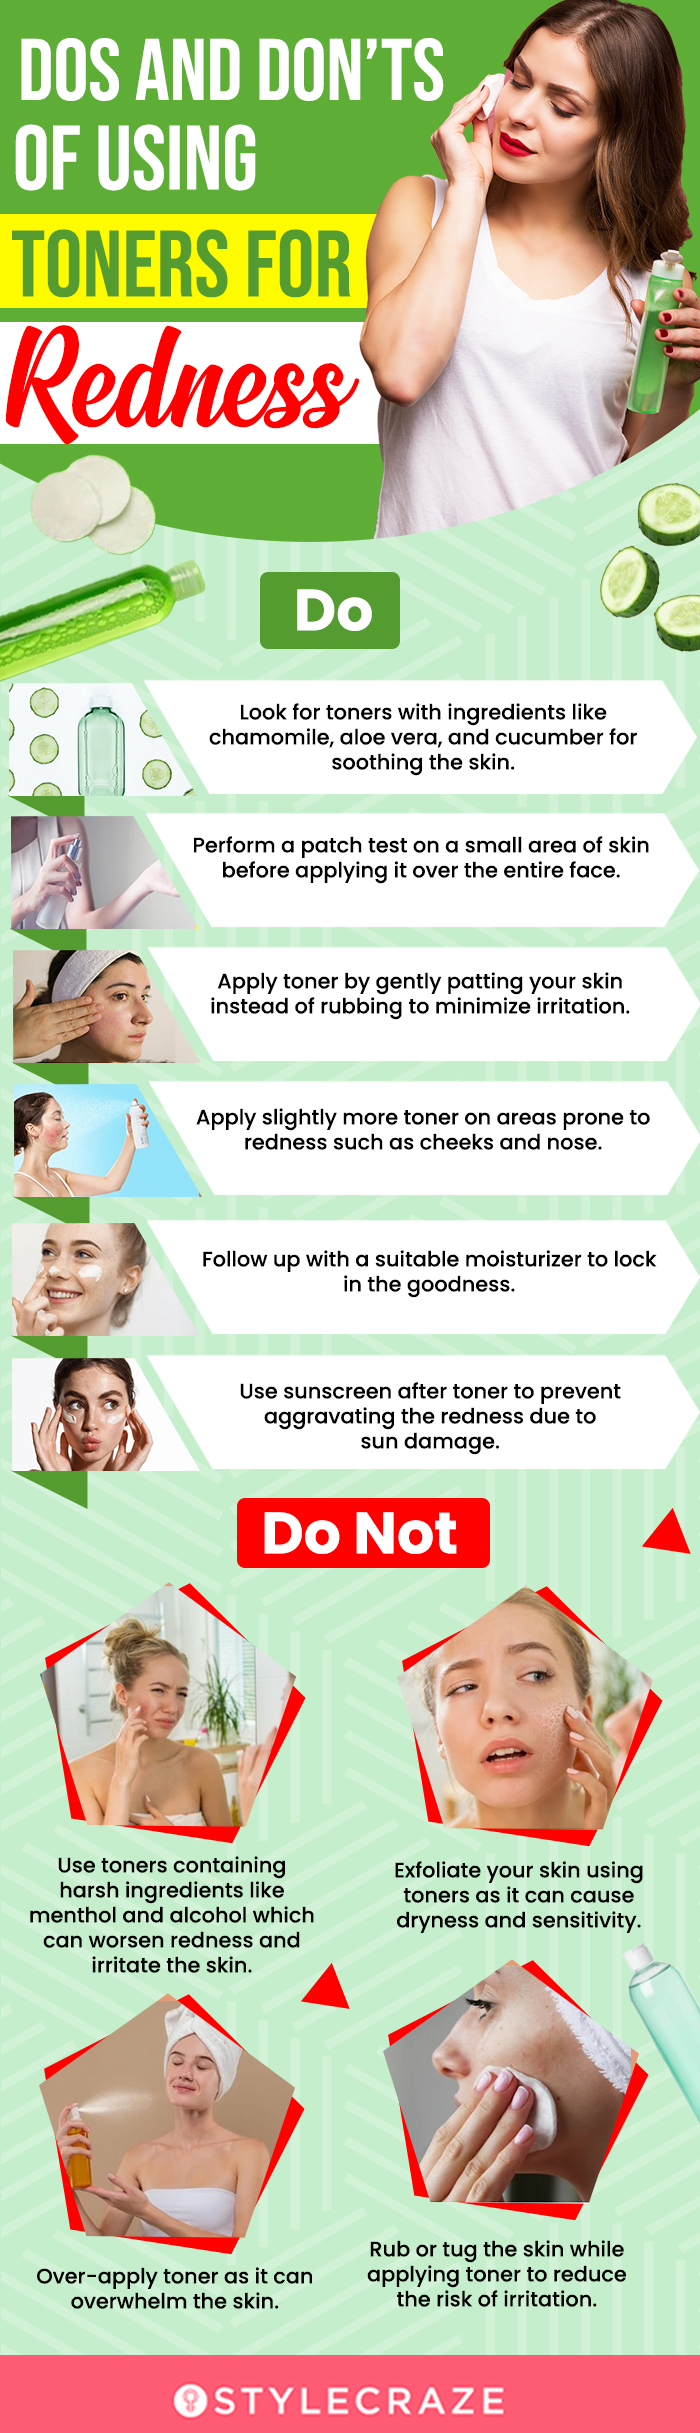 Do’s And Don’ts Of Using Toners For Redness (infographic)